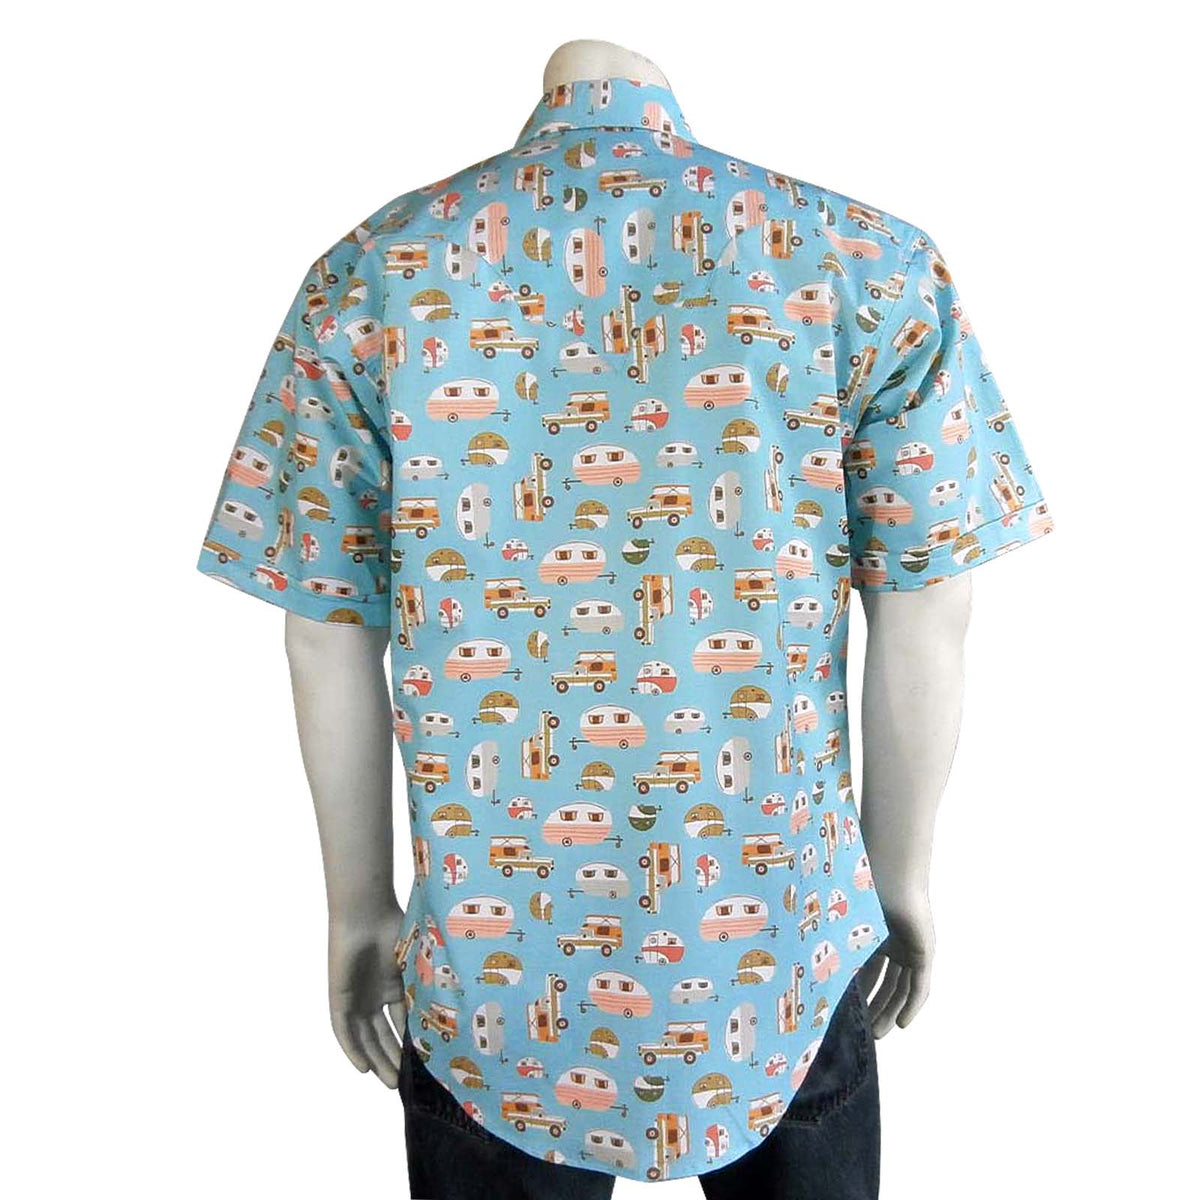 Men’s Retro Campers Print Short Sleeve Western Shirt in Turquoise - Rockmount